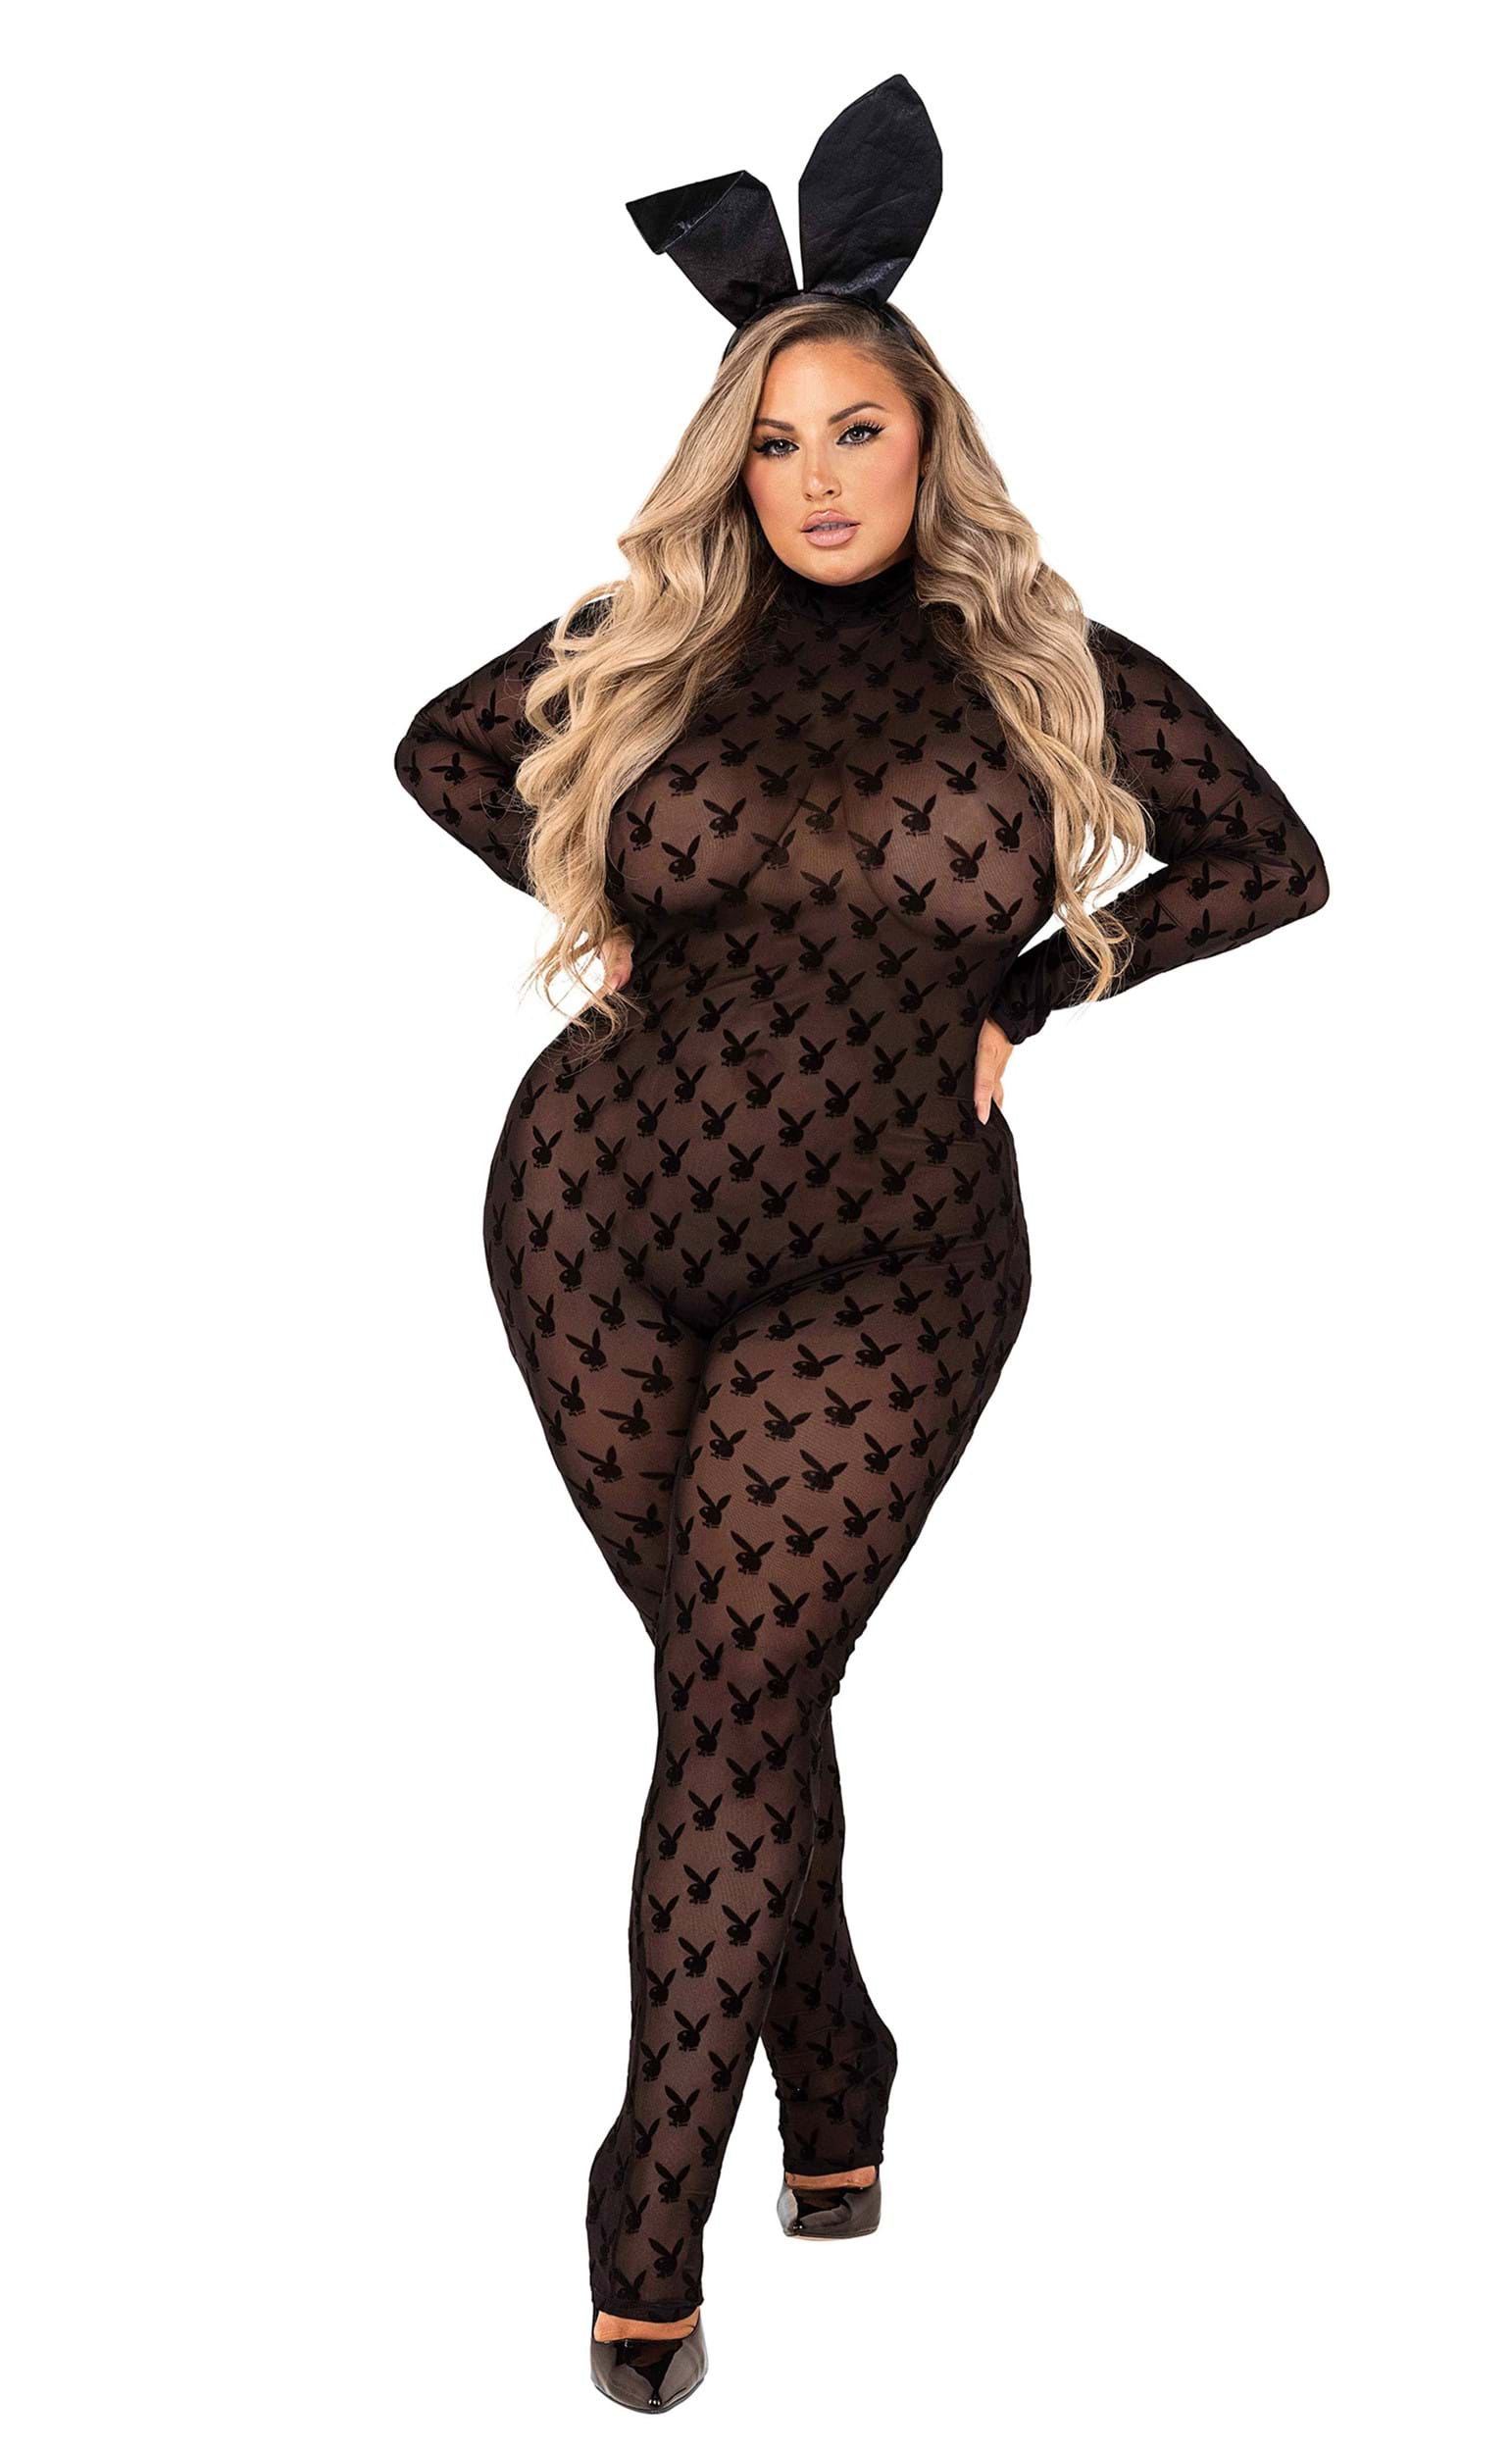 https://images.halloween.com/products/83832/1-1/playboy-plus-size-womens-sheer-bunny-bodysuit.jpg